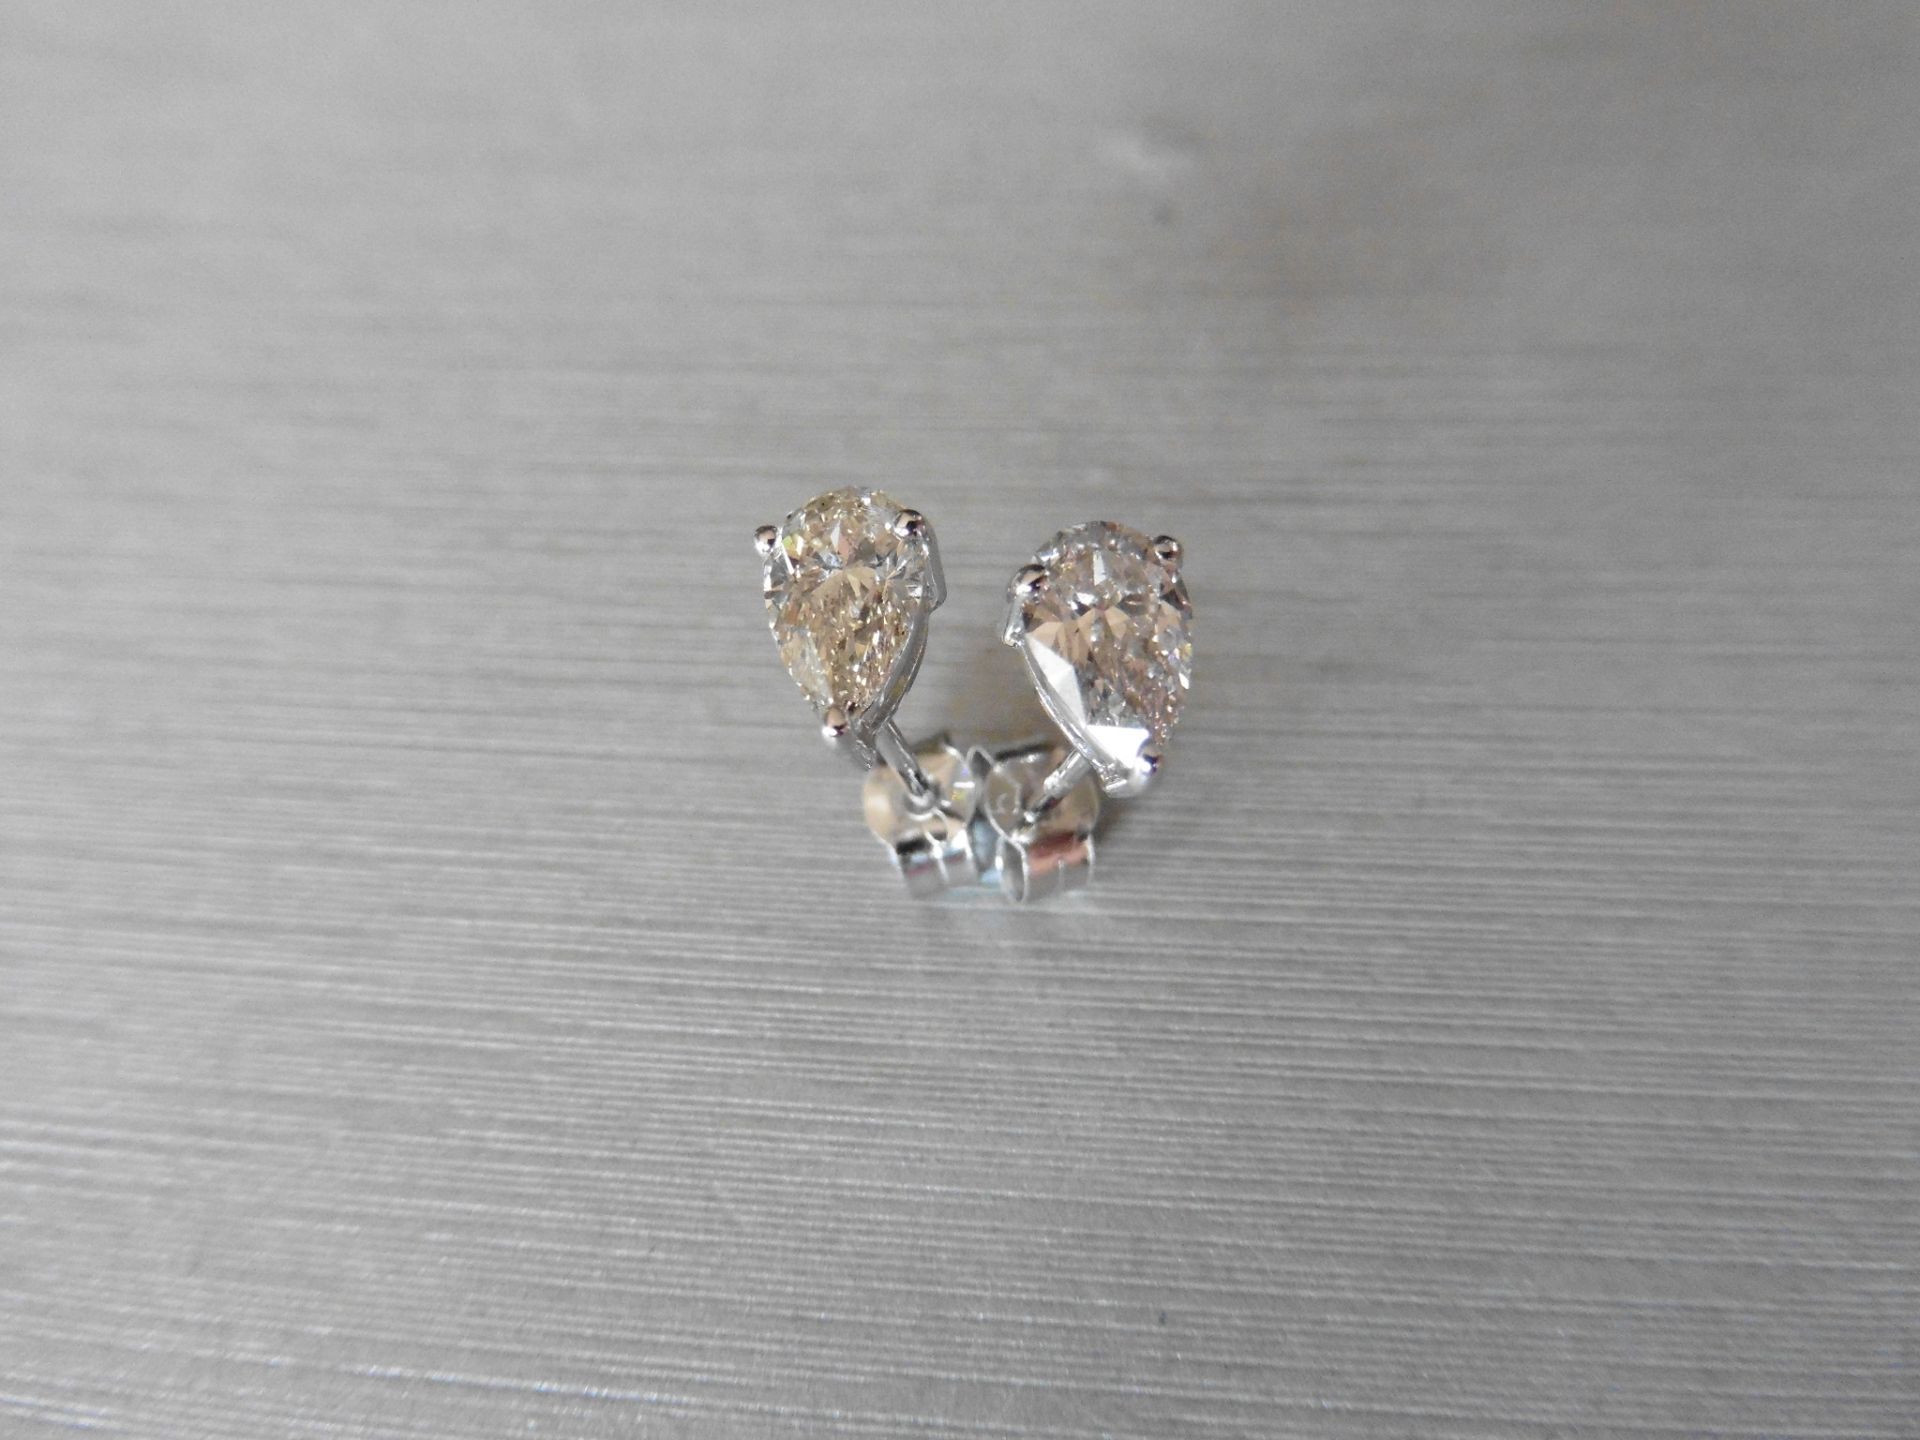 1.40ct Diamond solitaire earrings set with pear shaped diamonds, I colour VS2 clarity. Three claw